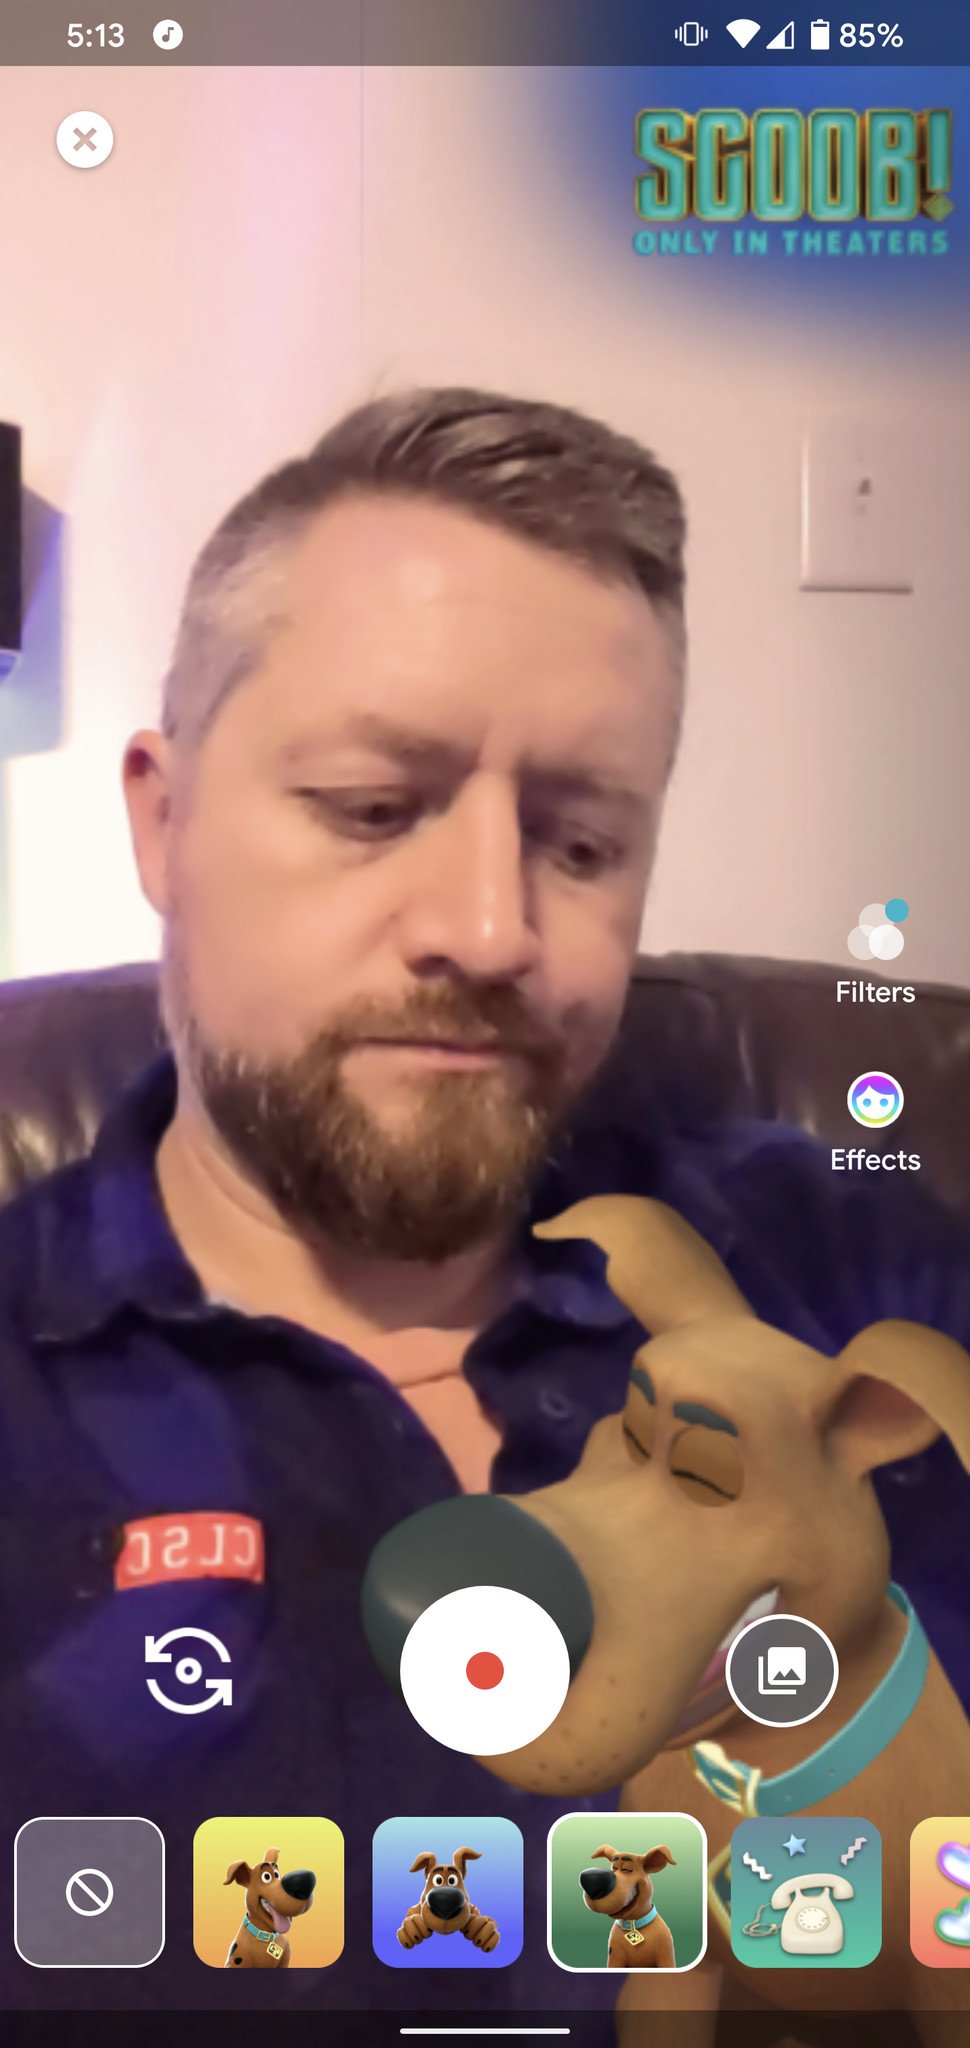 Google Duo Scooby lower right